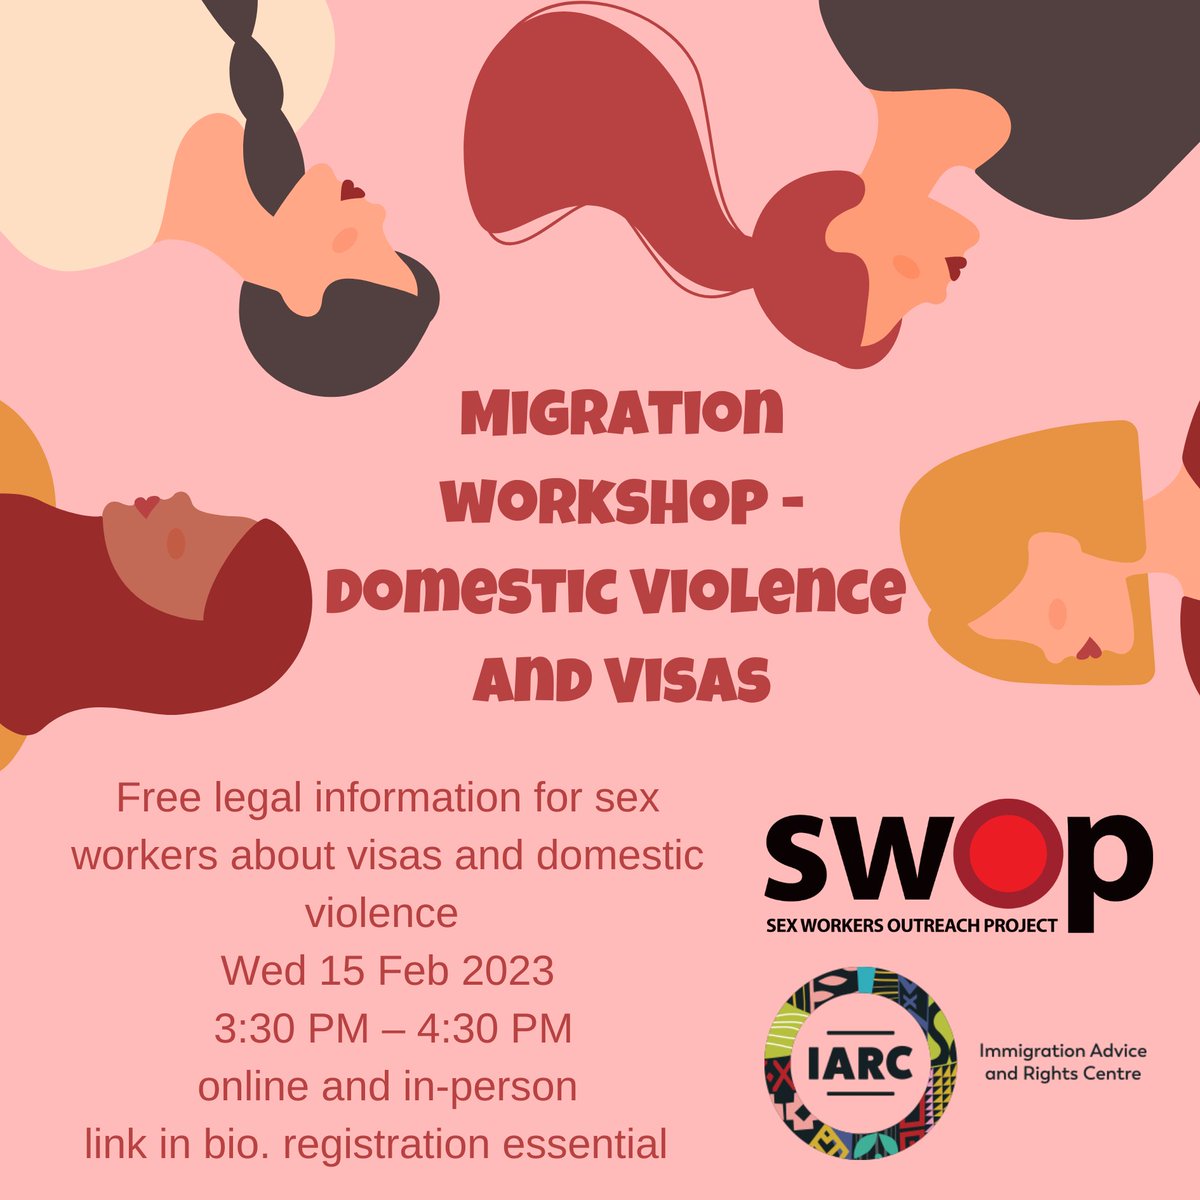 On Wednesday Feb 15 we're partnering with @iarcaustralia for a session on visas and domestic violence for migrant sex workers.